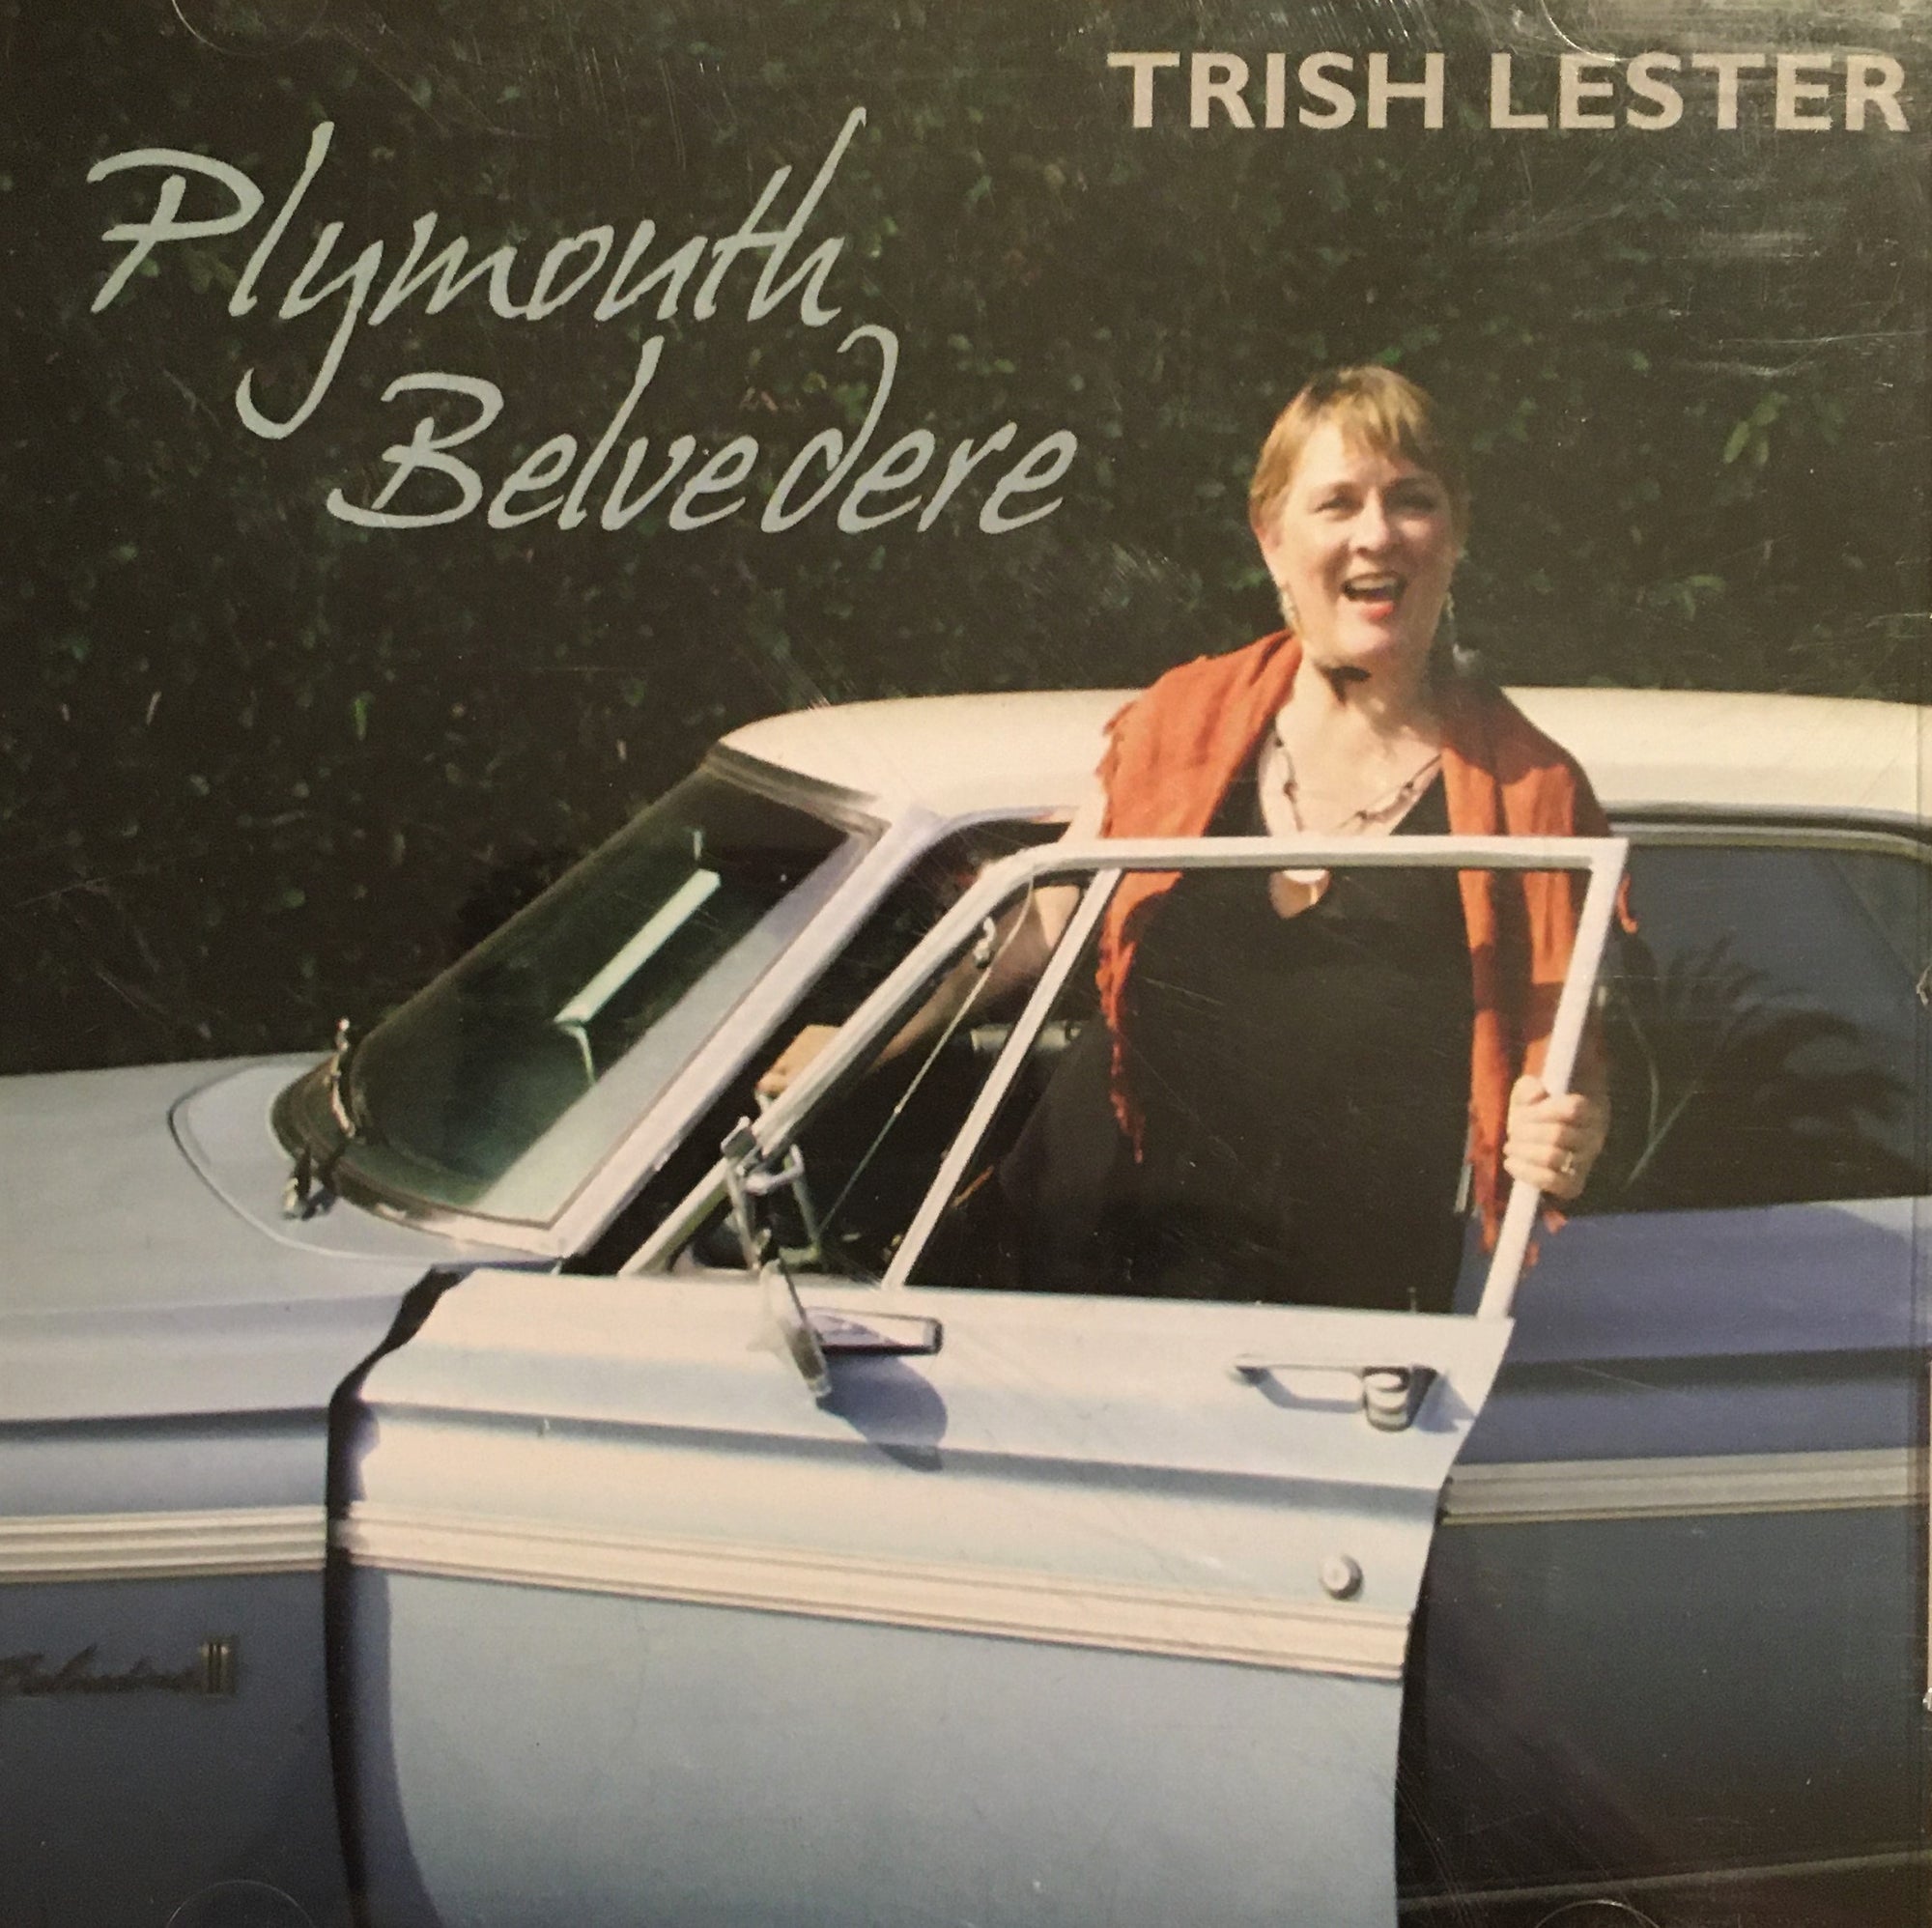 CD Plymouth Belvedere by Trish Lester